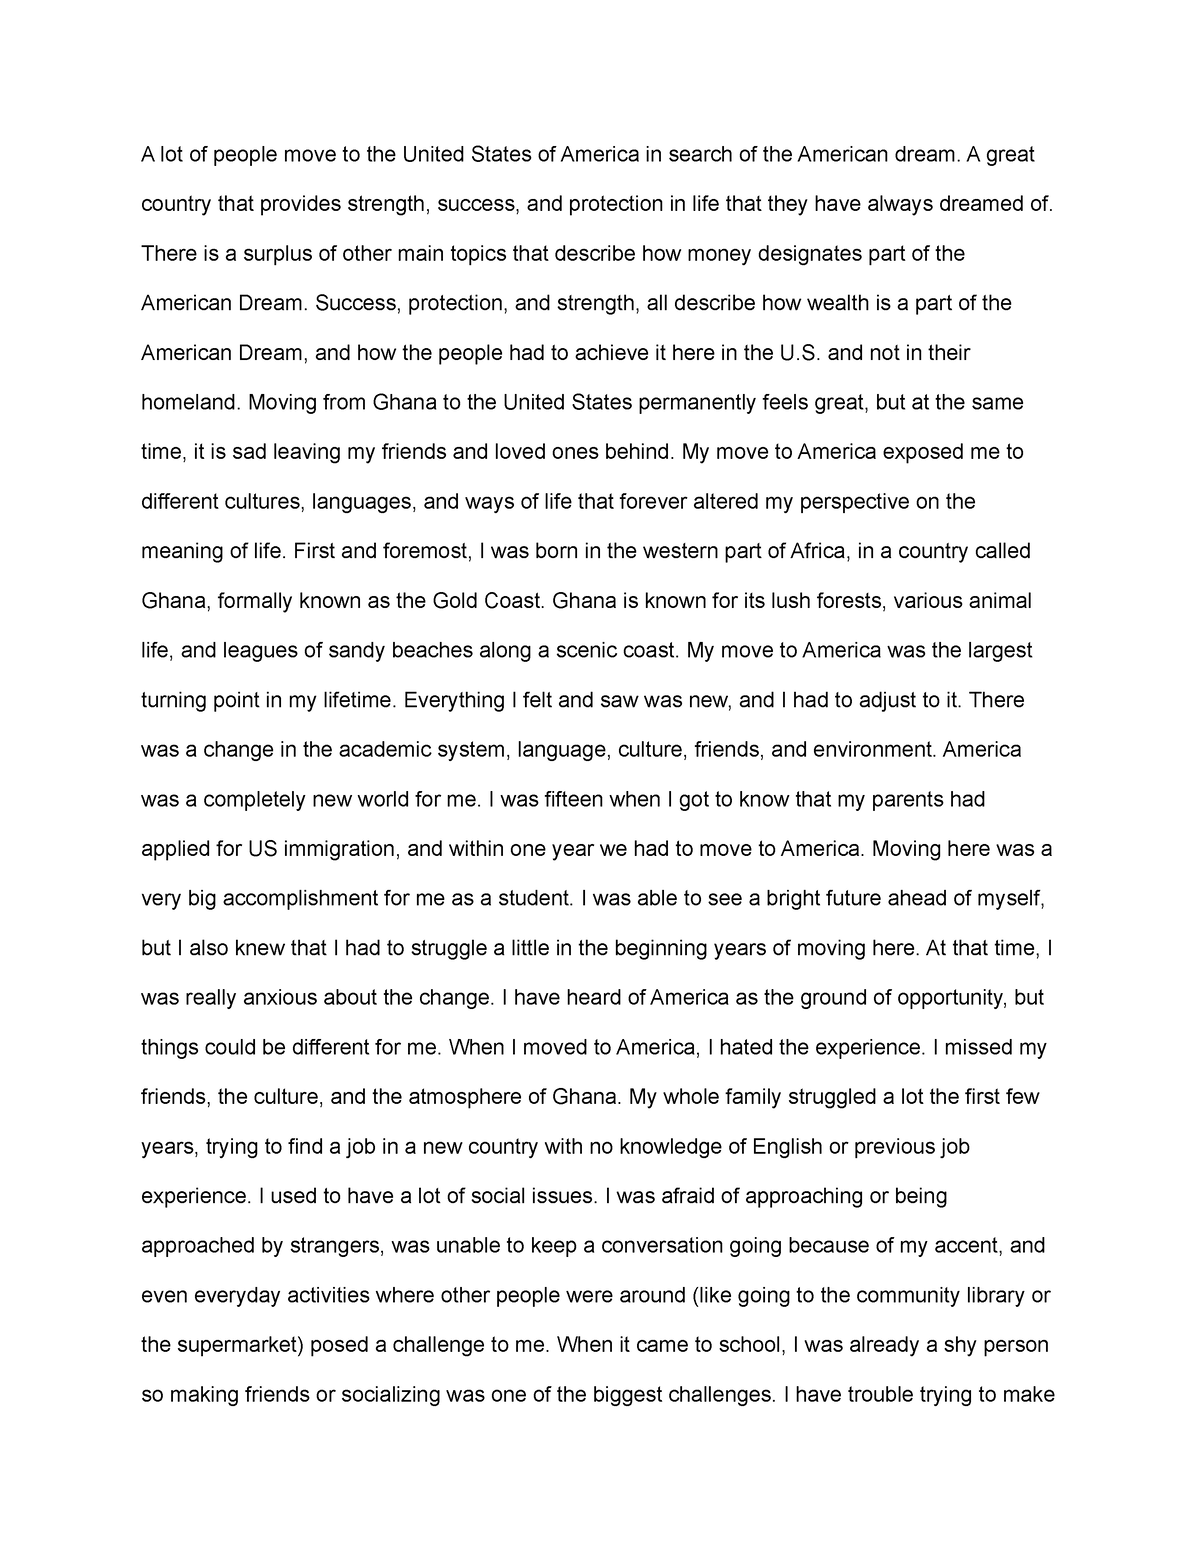 college essay about moving to the us